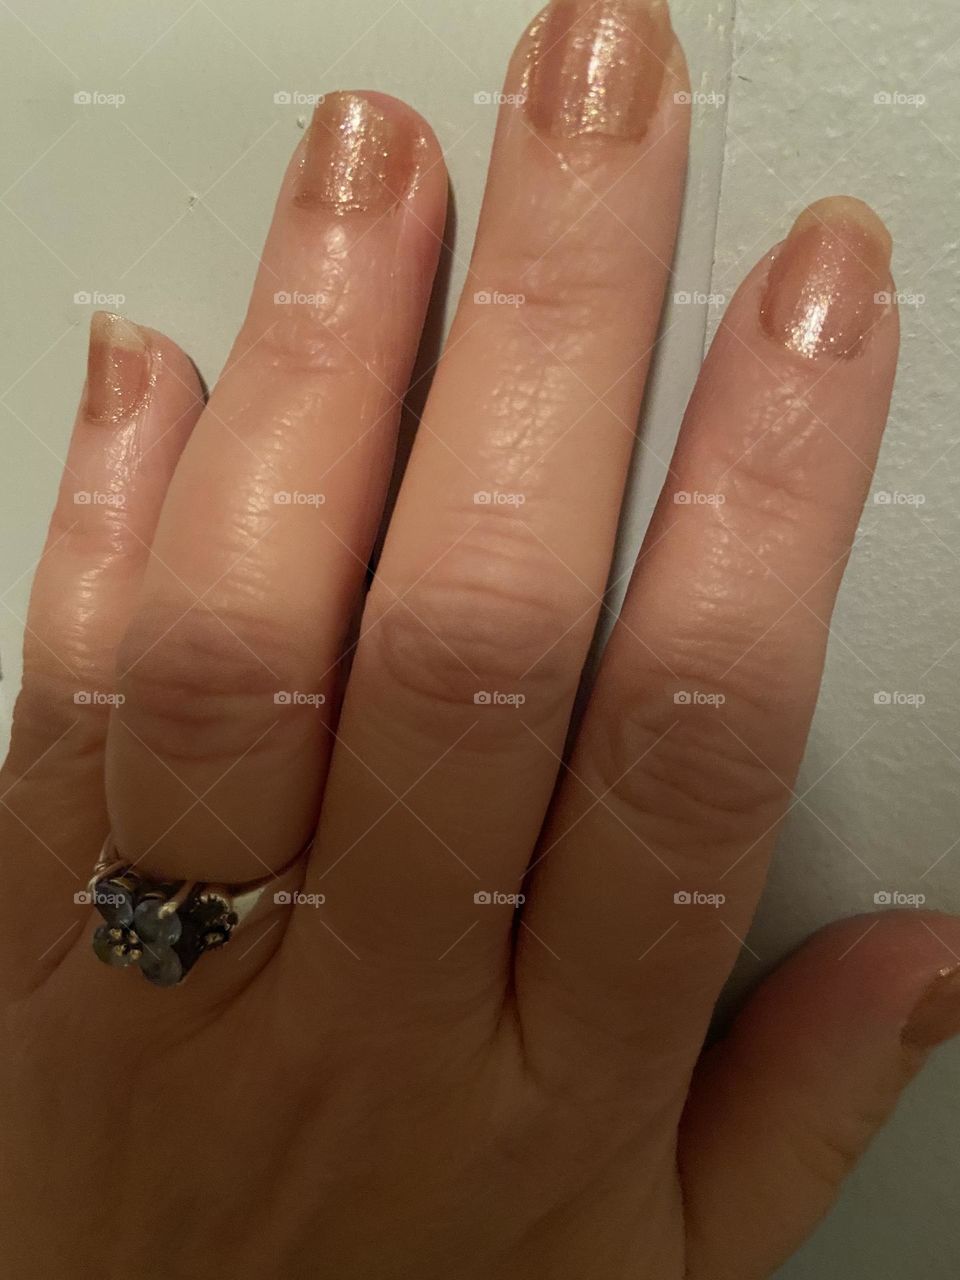 Natural looking nails in pinkish gold sparkly polish against a white wall.